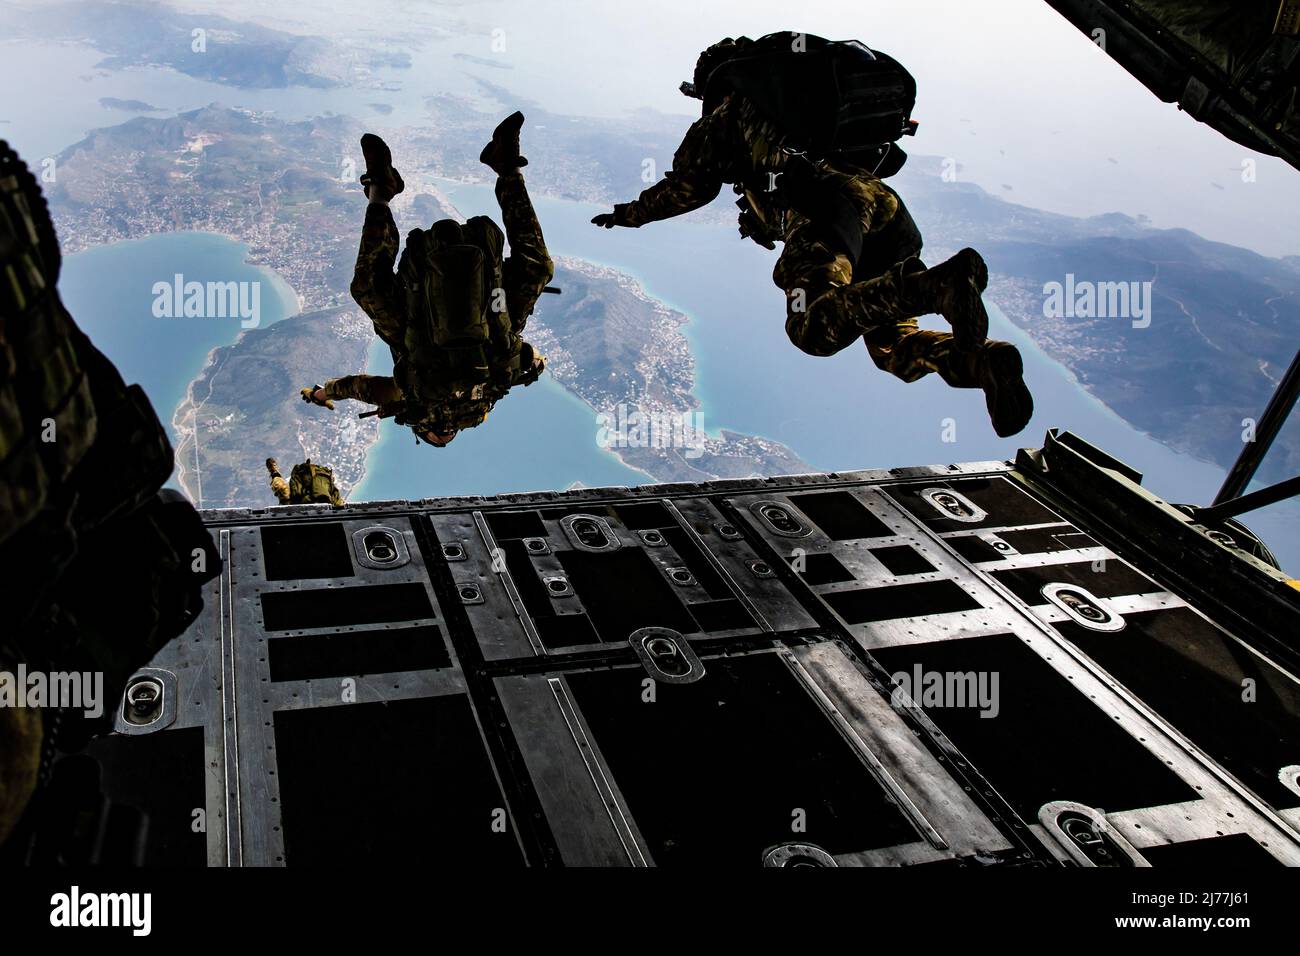 Members of Greek Special Forces (SOF) prepare for Exercise Orion as they jump from the ramp of a Greek Air Force C-130 aircraft during airborne operation over a coastal area near Elefsina, Greece, March 30, 2022. Exercise Orion reinforces Greece as a regional SOF leader, enhances interoperability across multiple domains, and strengthens relationships with NATO and non-NATO partners. The exercise focuses on highlighting operational capabilities, international collaborations and conventional and hybrid warfare training. (U.S. Army photo by Sgt. Hannah Hawkins) Stock Photo